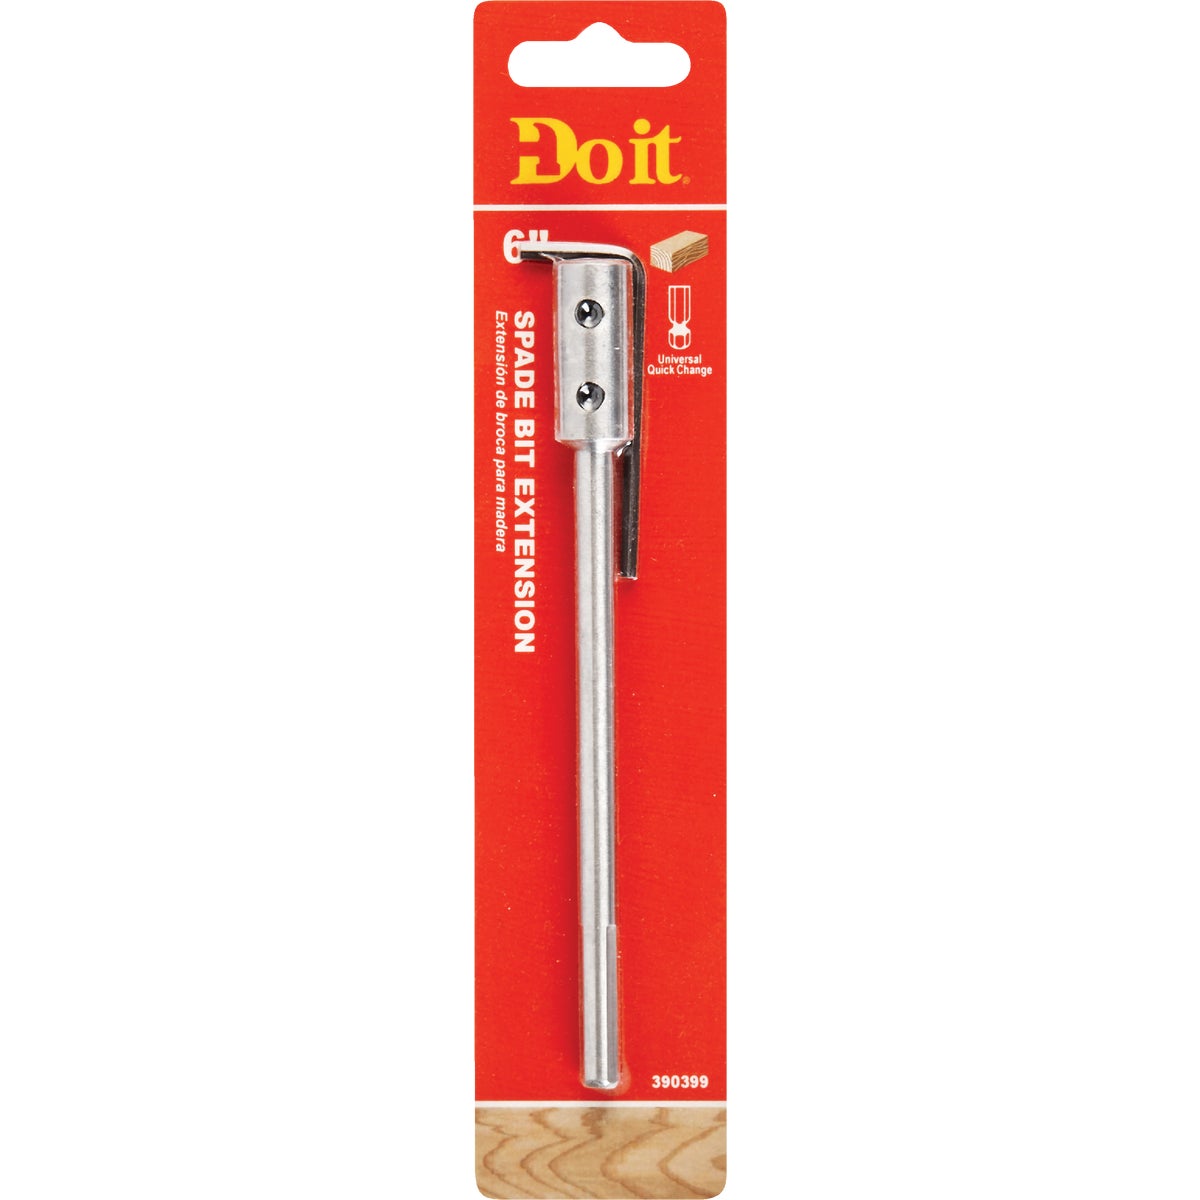 Do it 6 In. x 1/4 In. Spade Drill Bit Extension